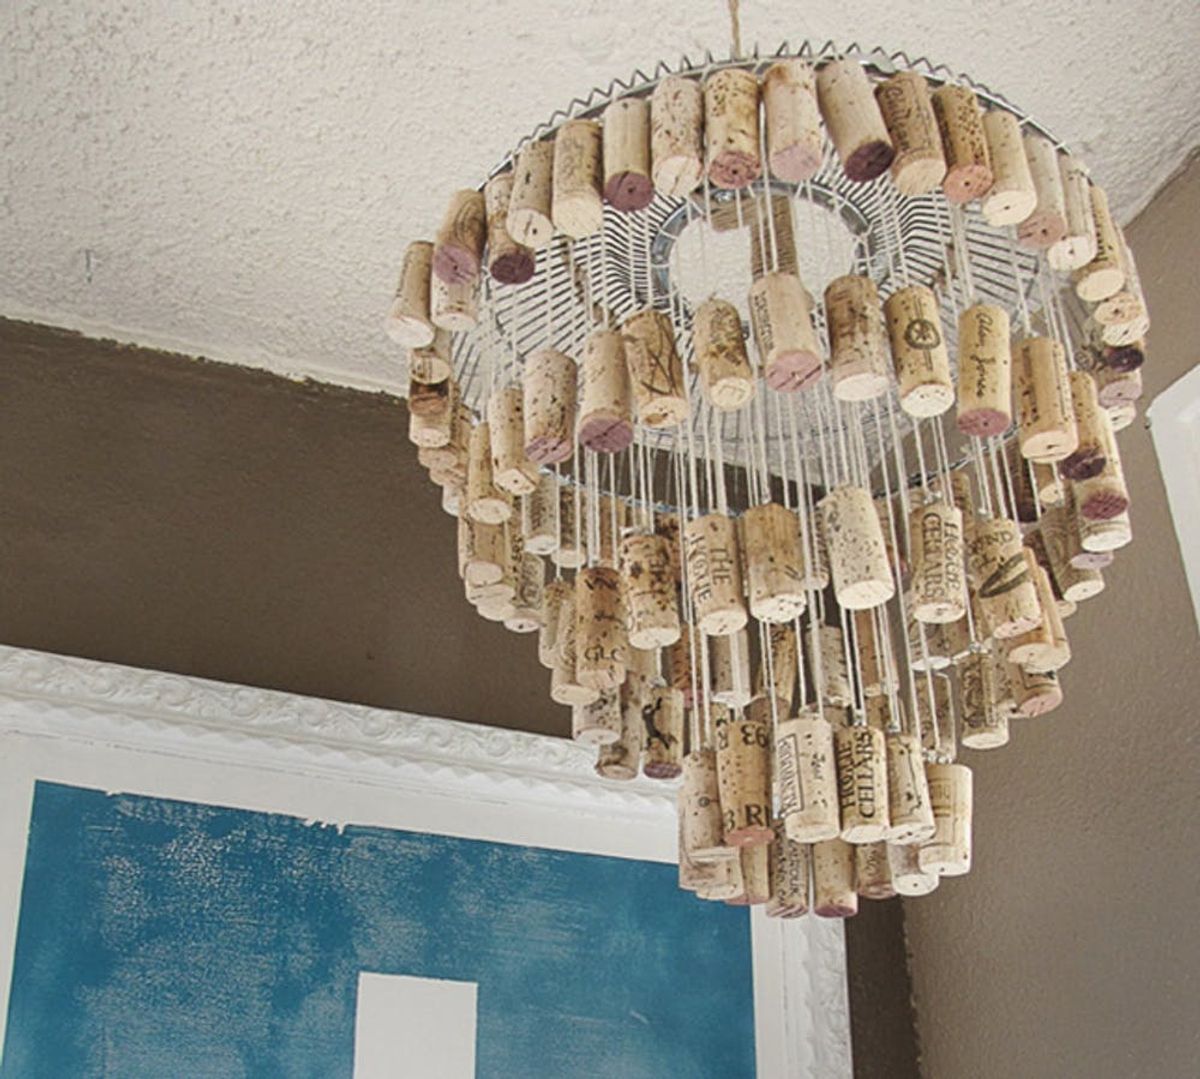 20 Quirky Ways To Use Wine Corks